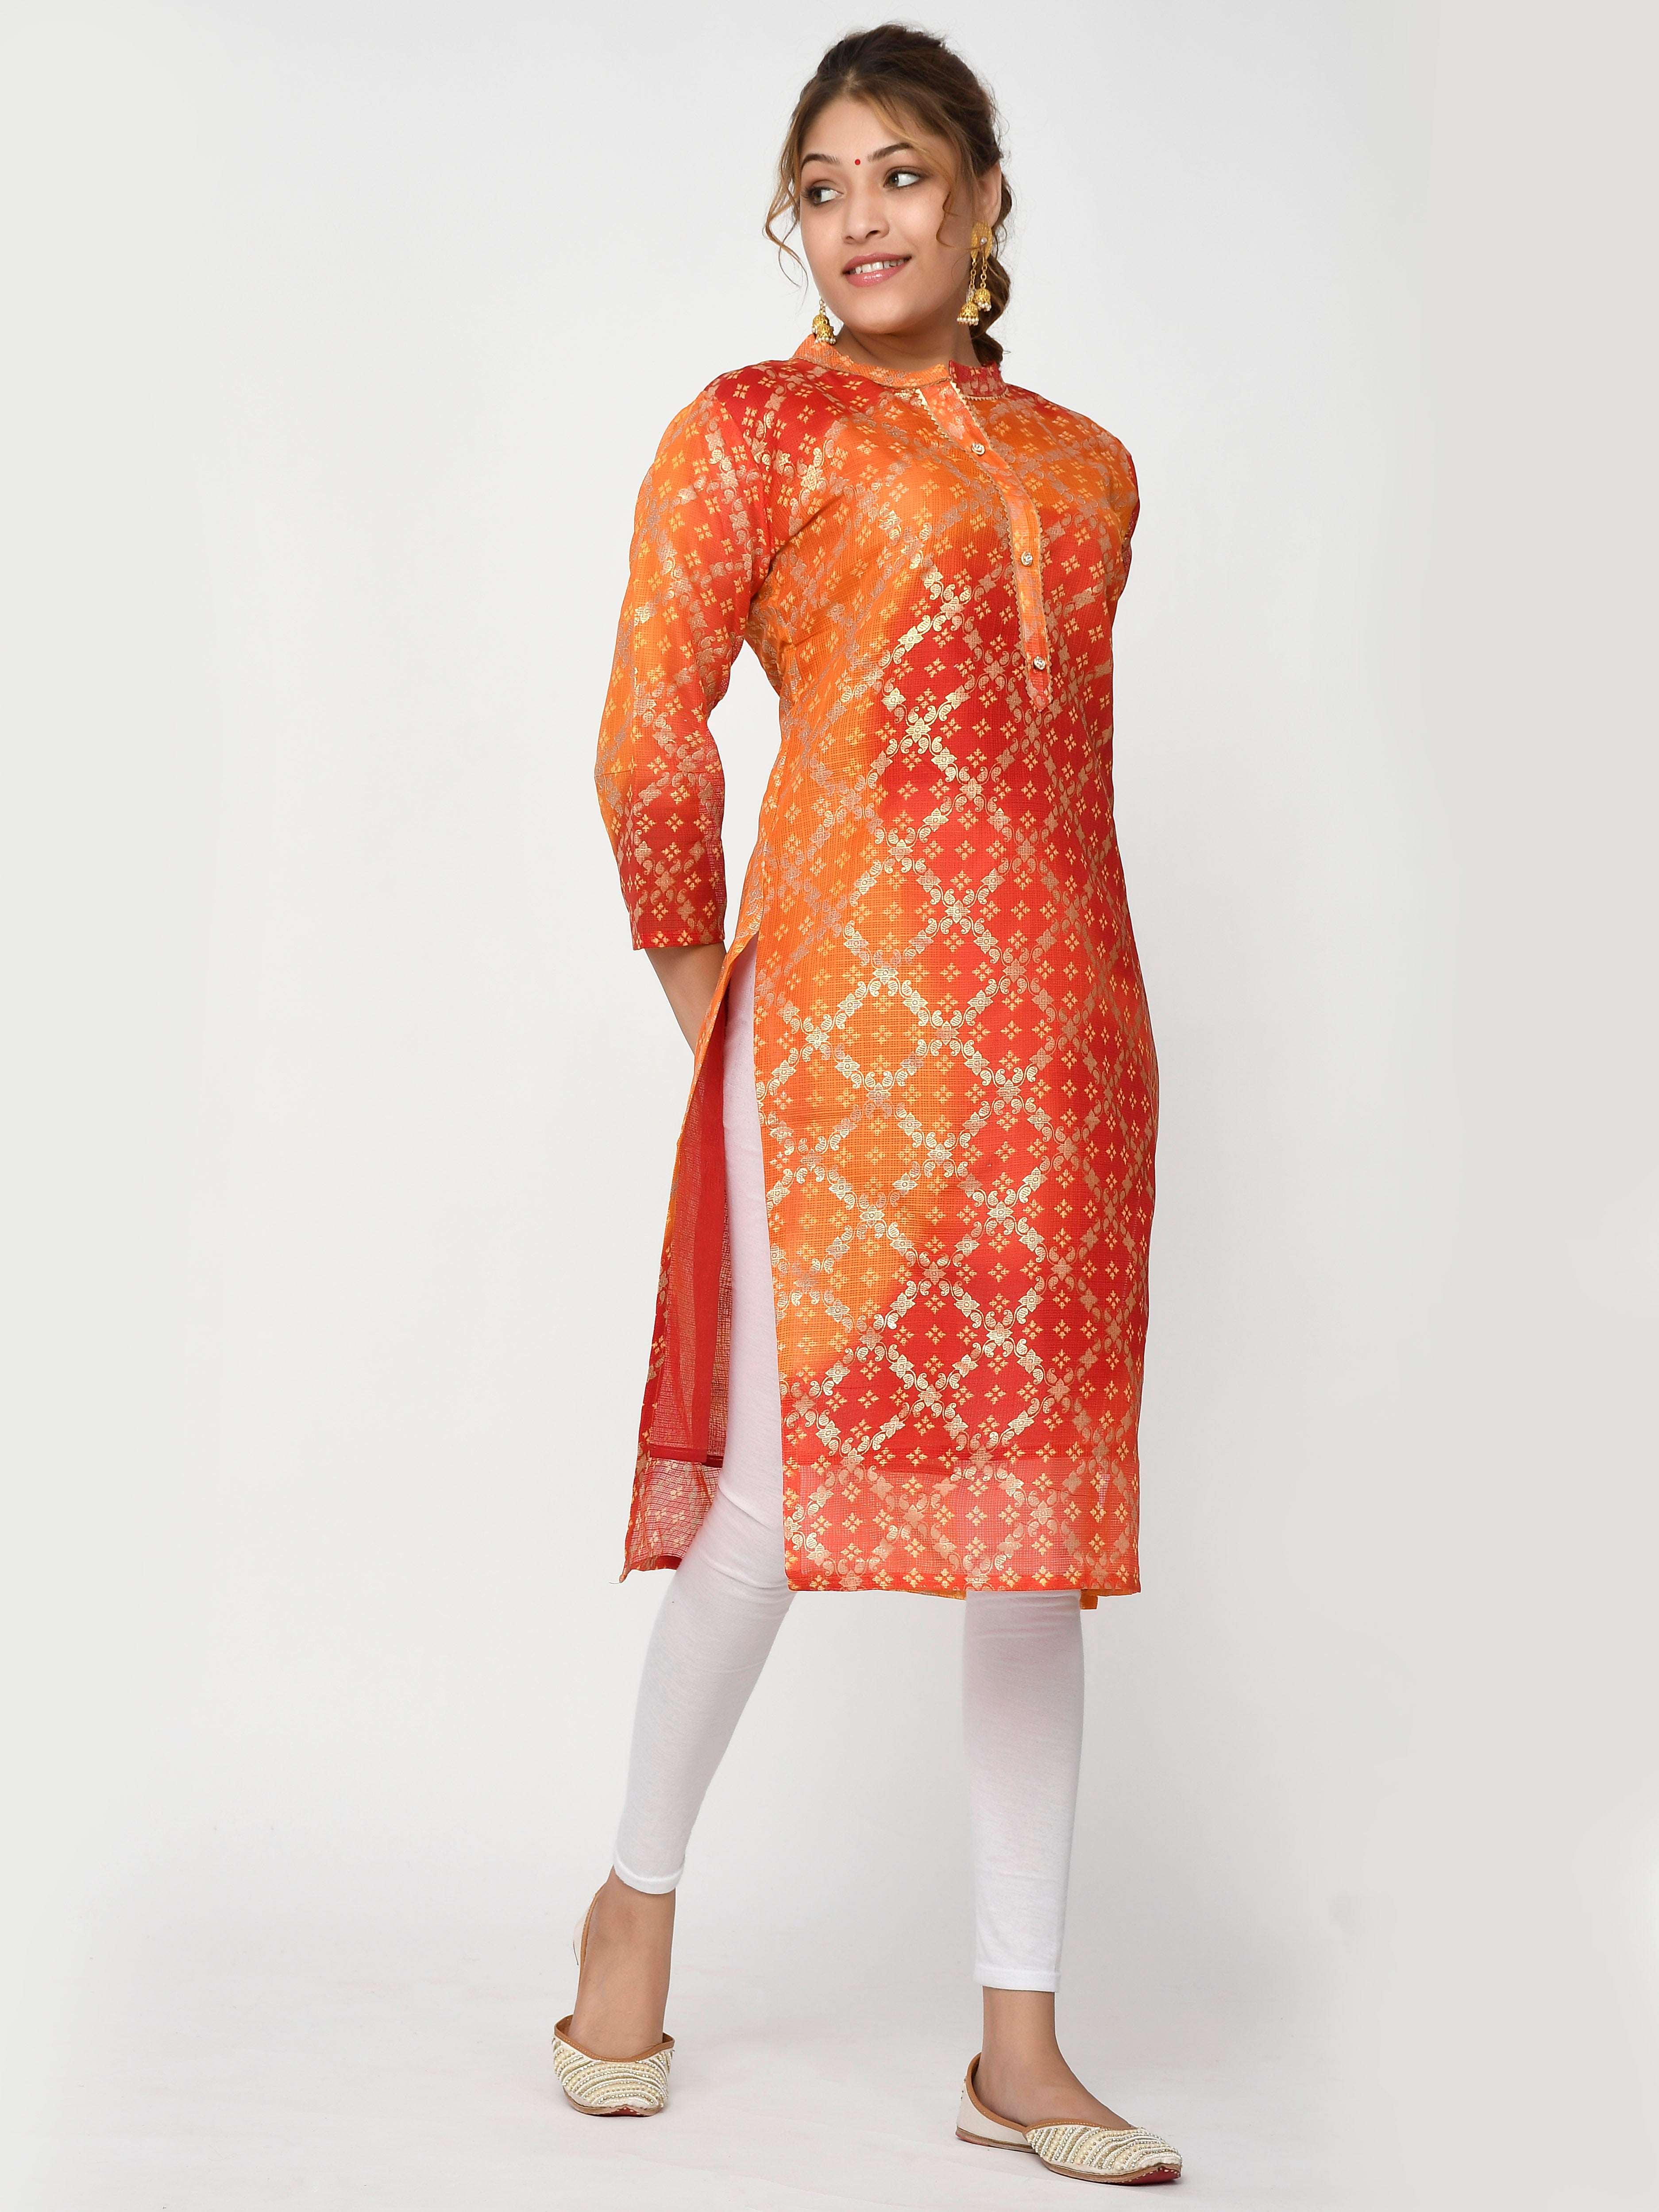 Wholesale Printed Cotton Dress material at Best Price in India